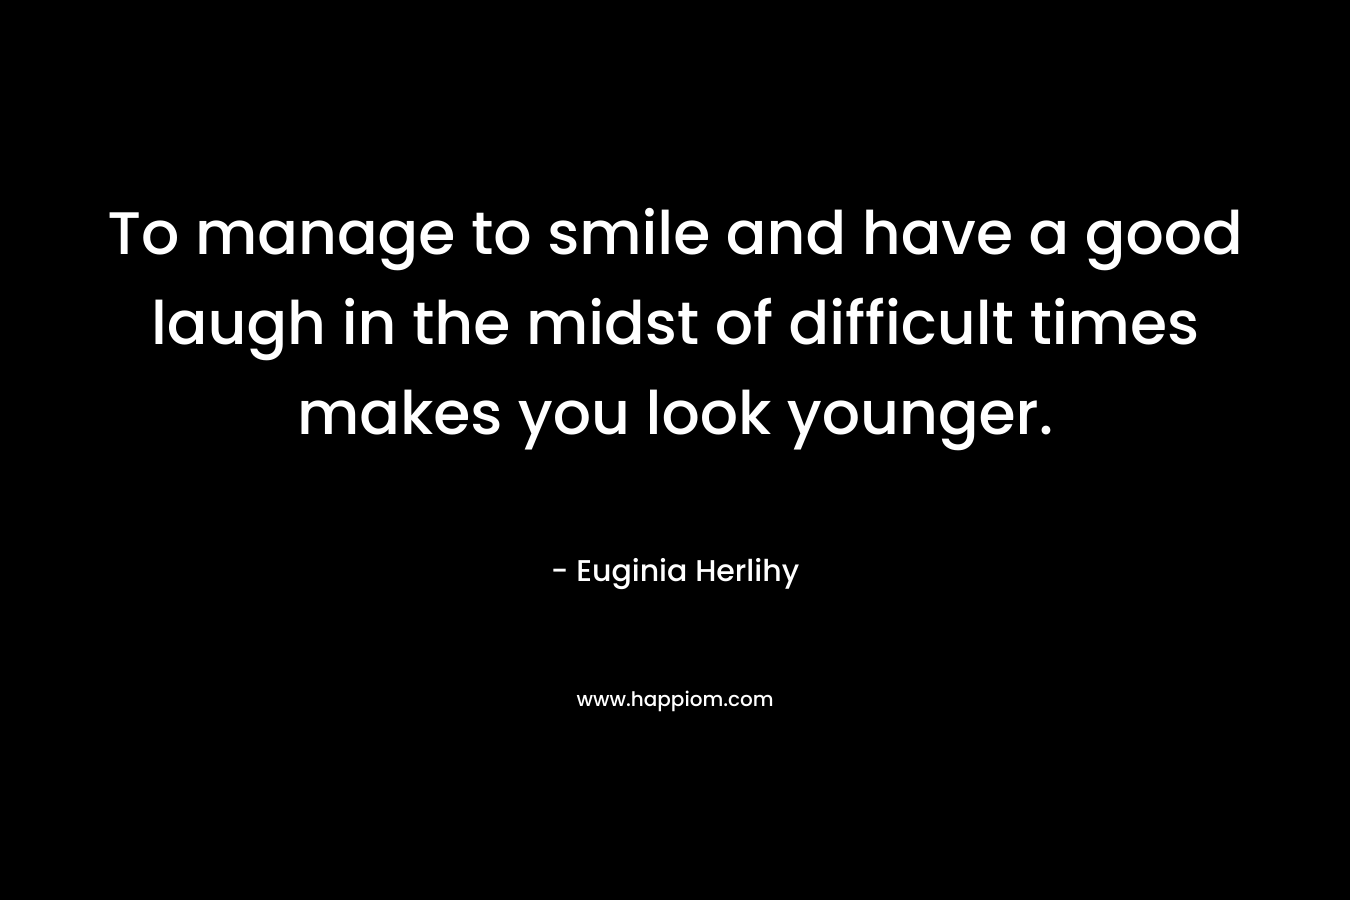 To manage to smile and have a good laugh in the midst of difficult times makes you look younger.